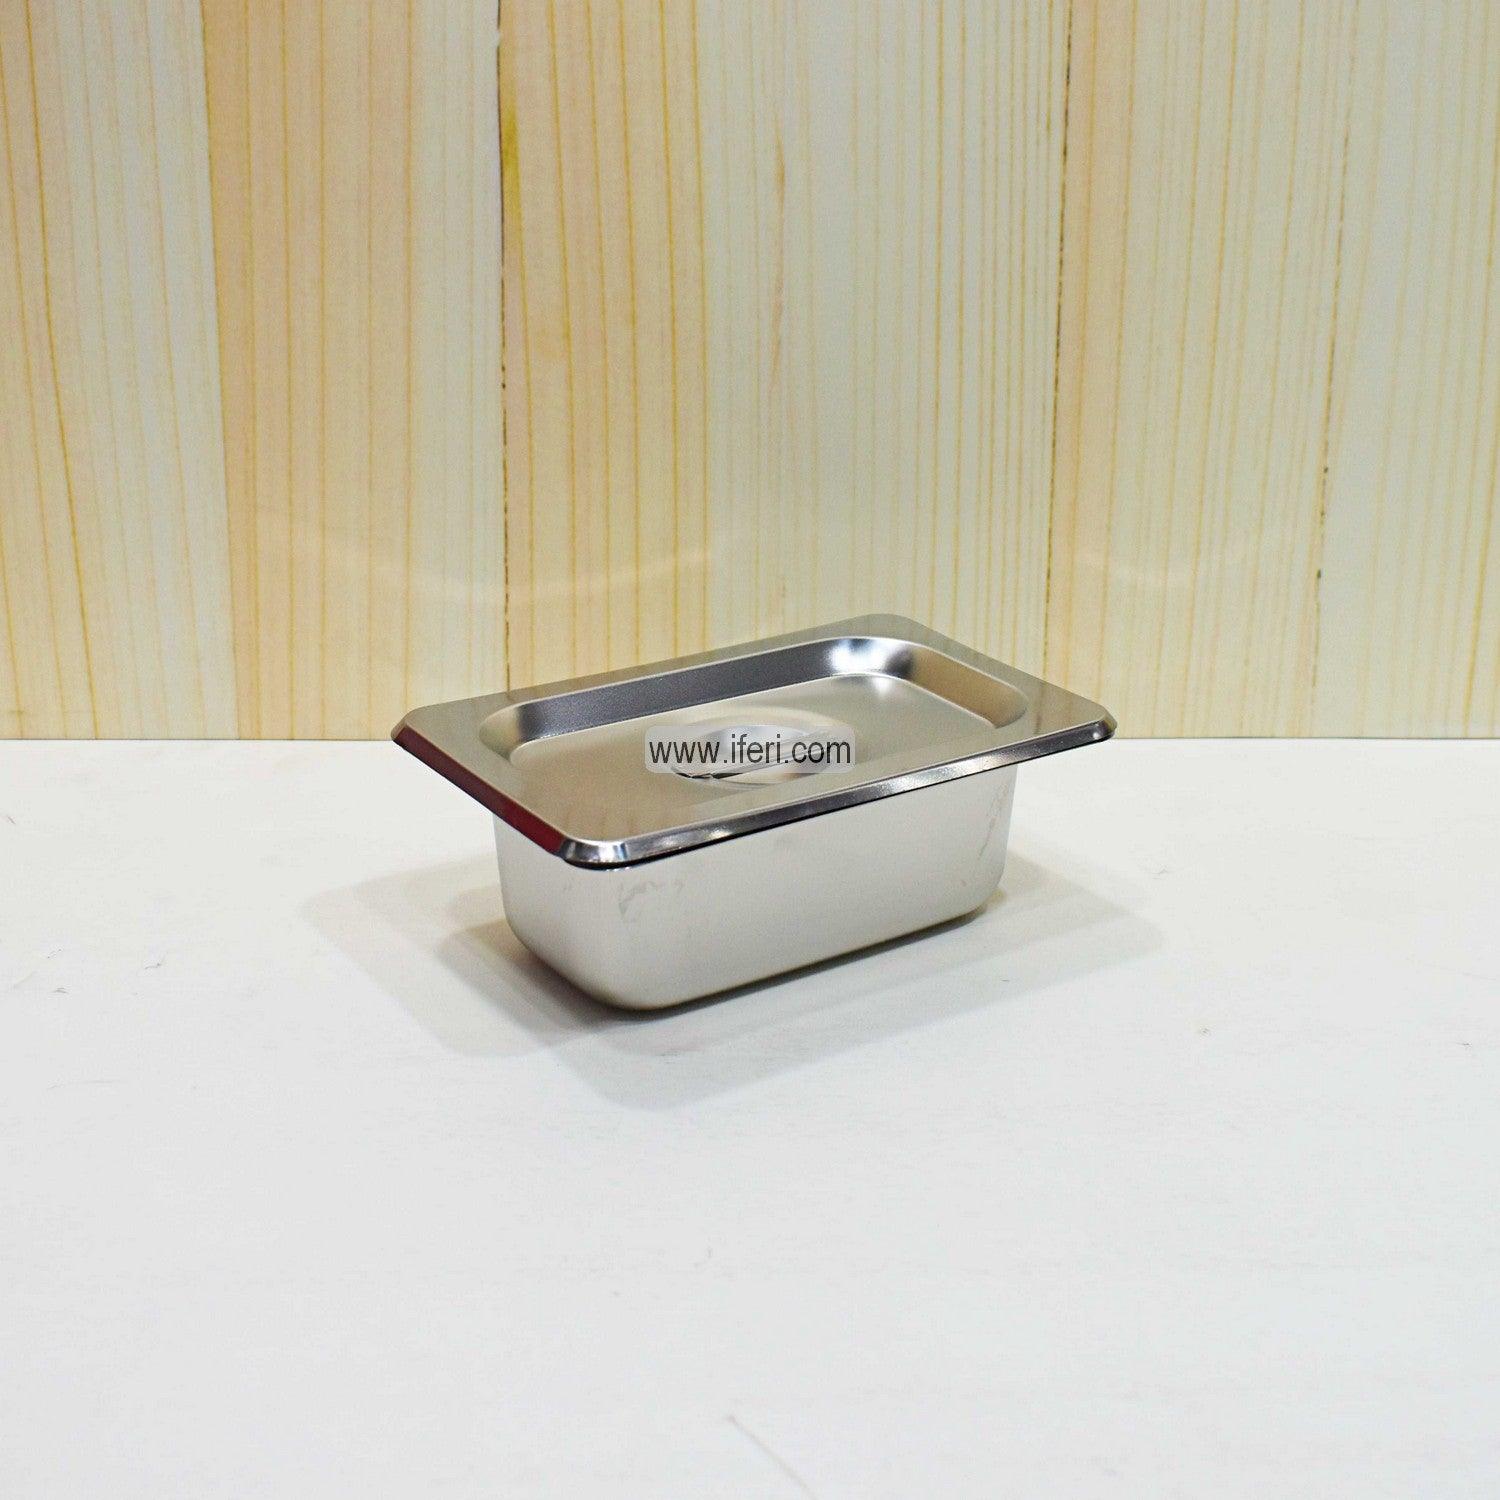 6.8 Inch Stainless Steel Food Pan with Lid SN0574 Price in Bangladesh - iferi.com